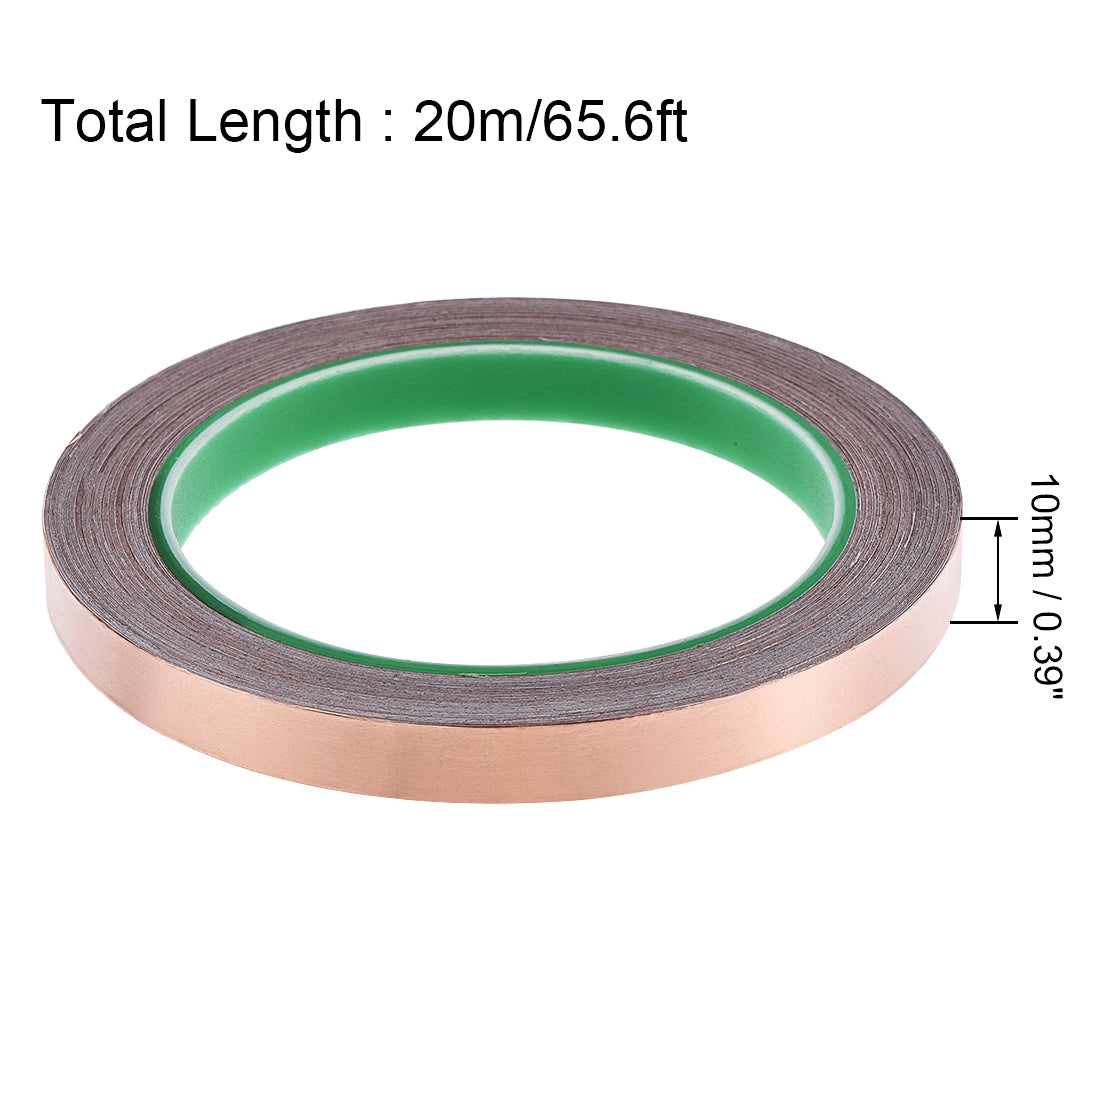 uxcell Uxcell Double Sided Conductive Tape Copper Foil Tape 10mmx20m for EMI Shielding 2 Roll